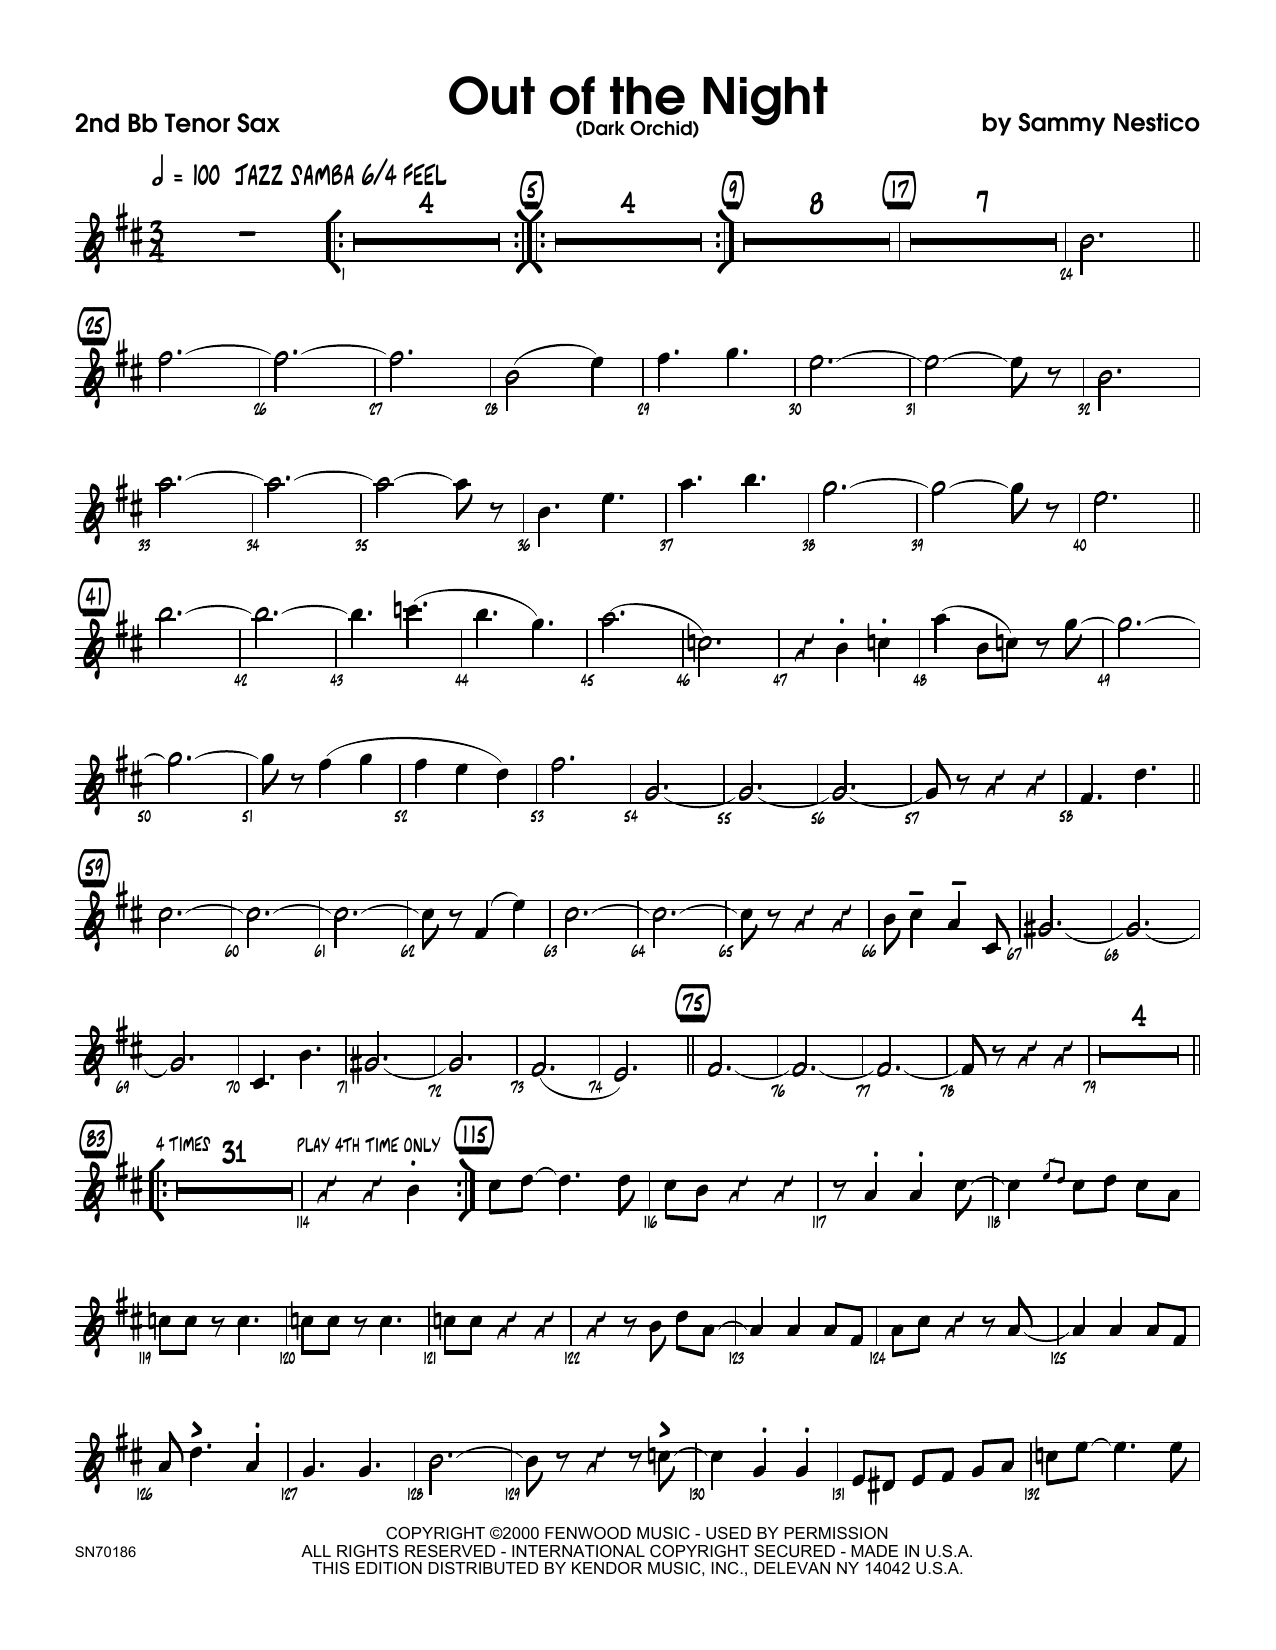 Download Sammy Nestico Out of the Night - 2nd Bb Tenor Saxopho Sheet Music